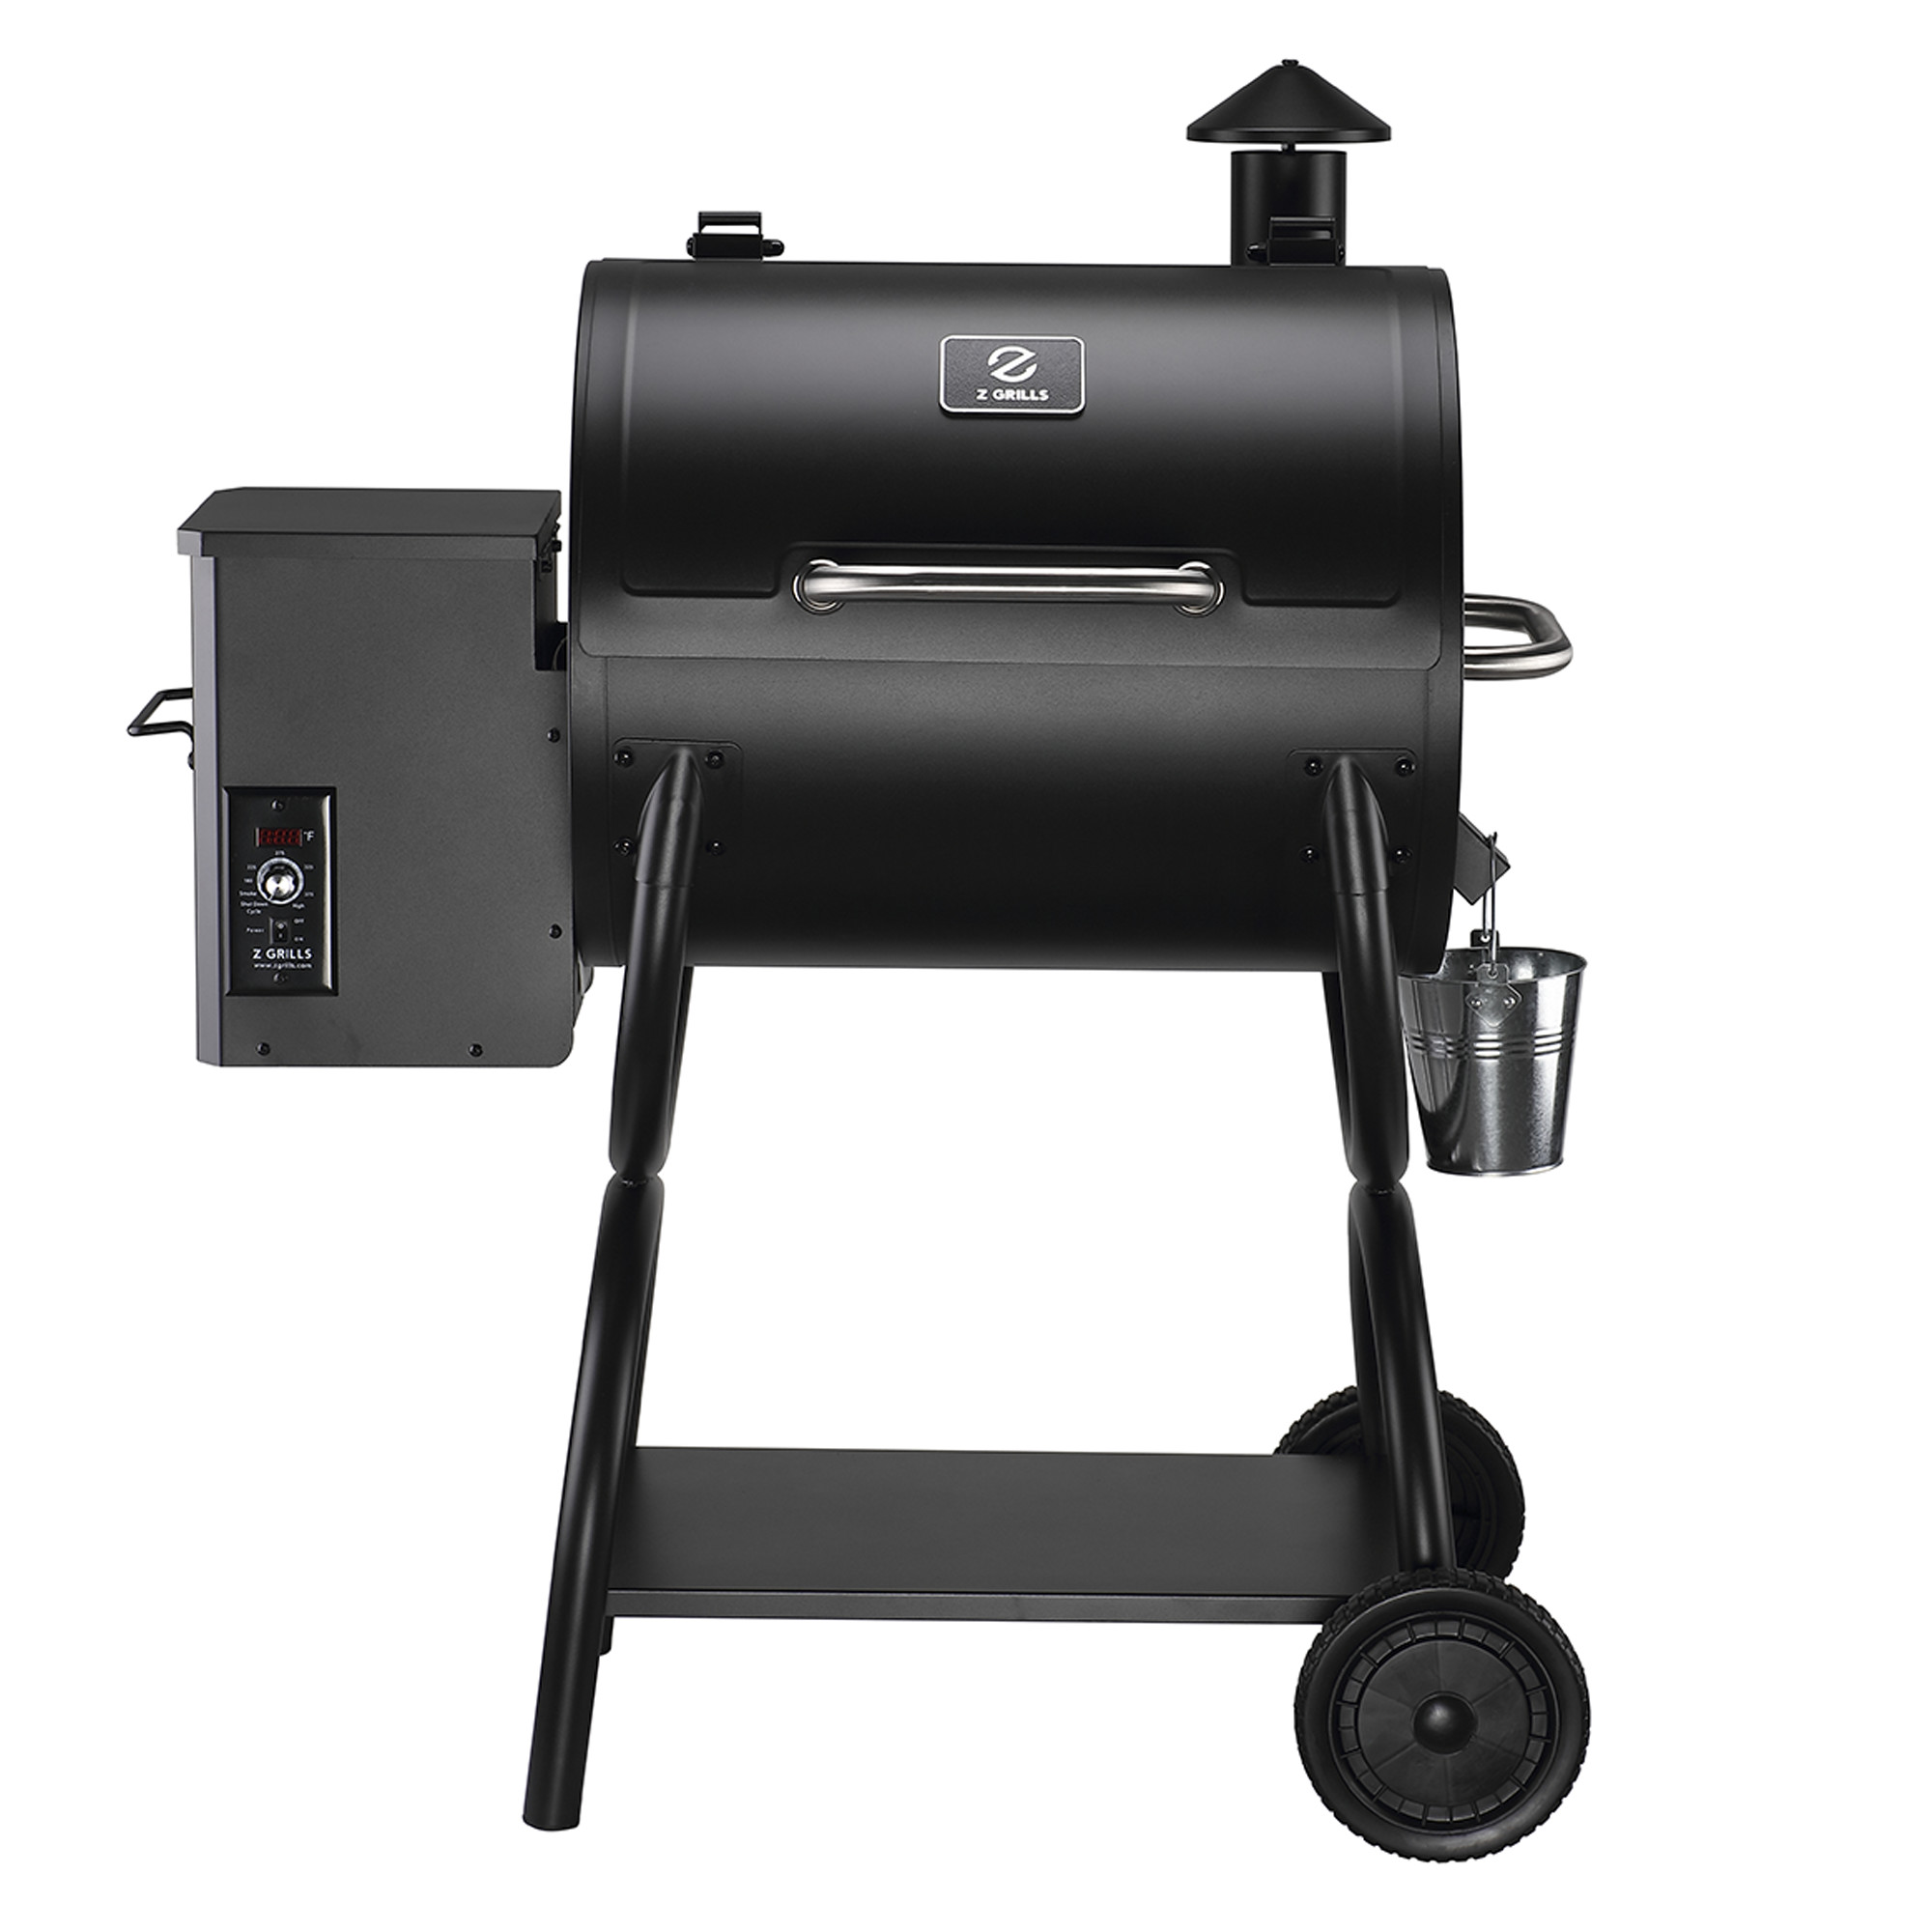 Z GRILLS ZPG-550A 590 sq. in. Wood Pellet Grill and Smoker 7-in-1 BBQ Black - image 2 of 8